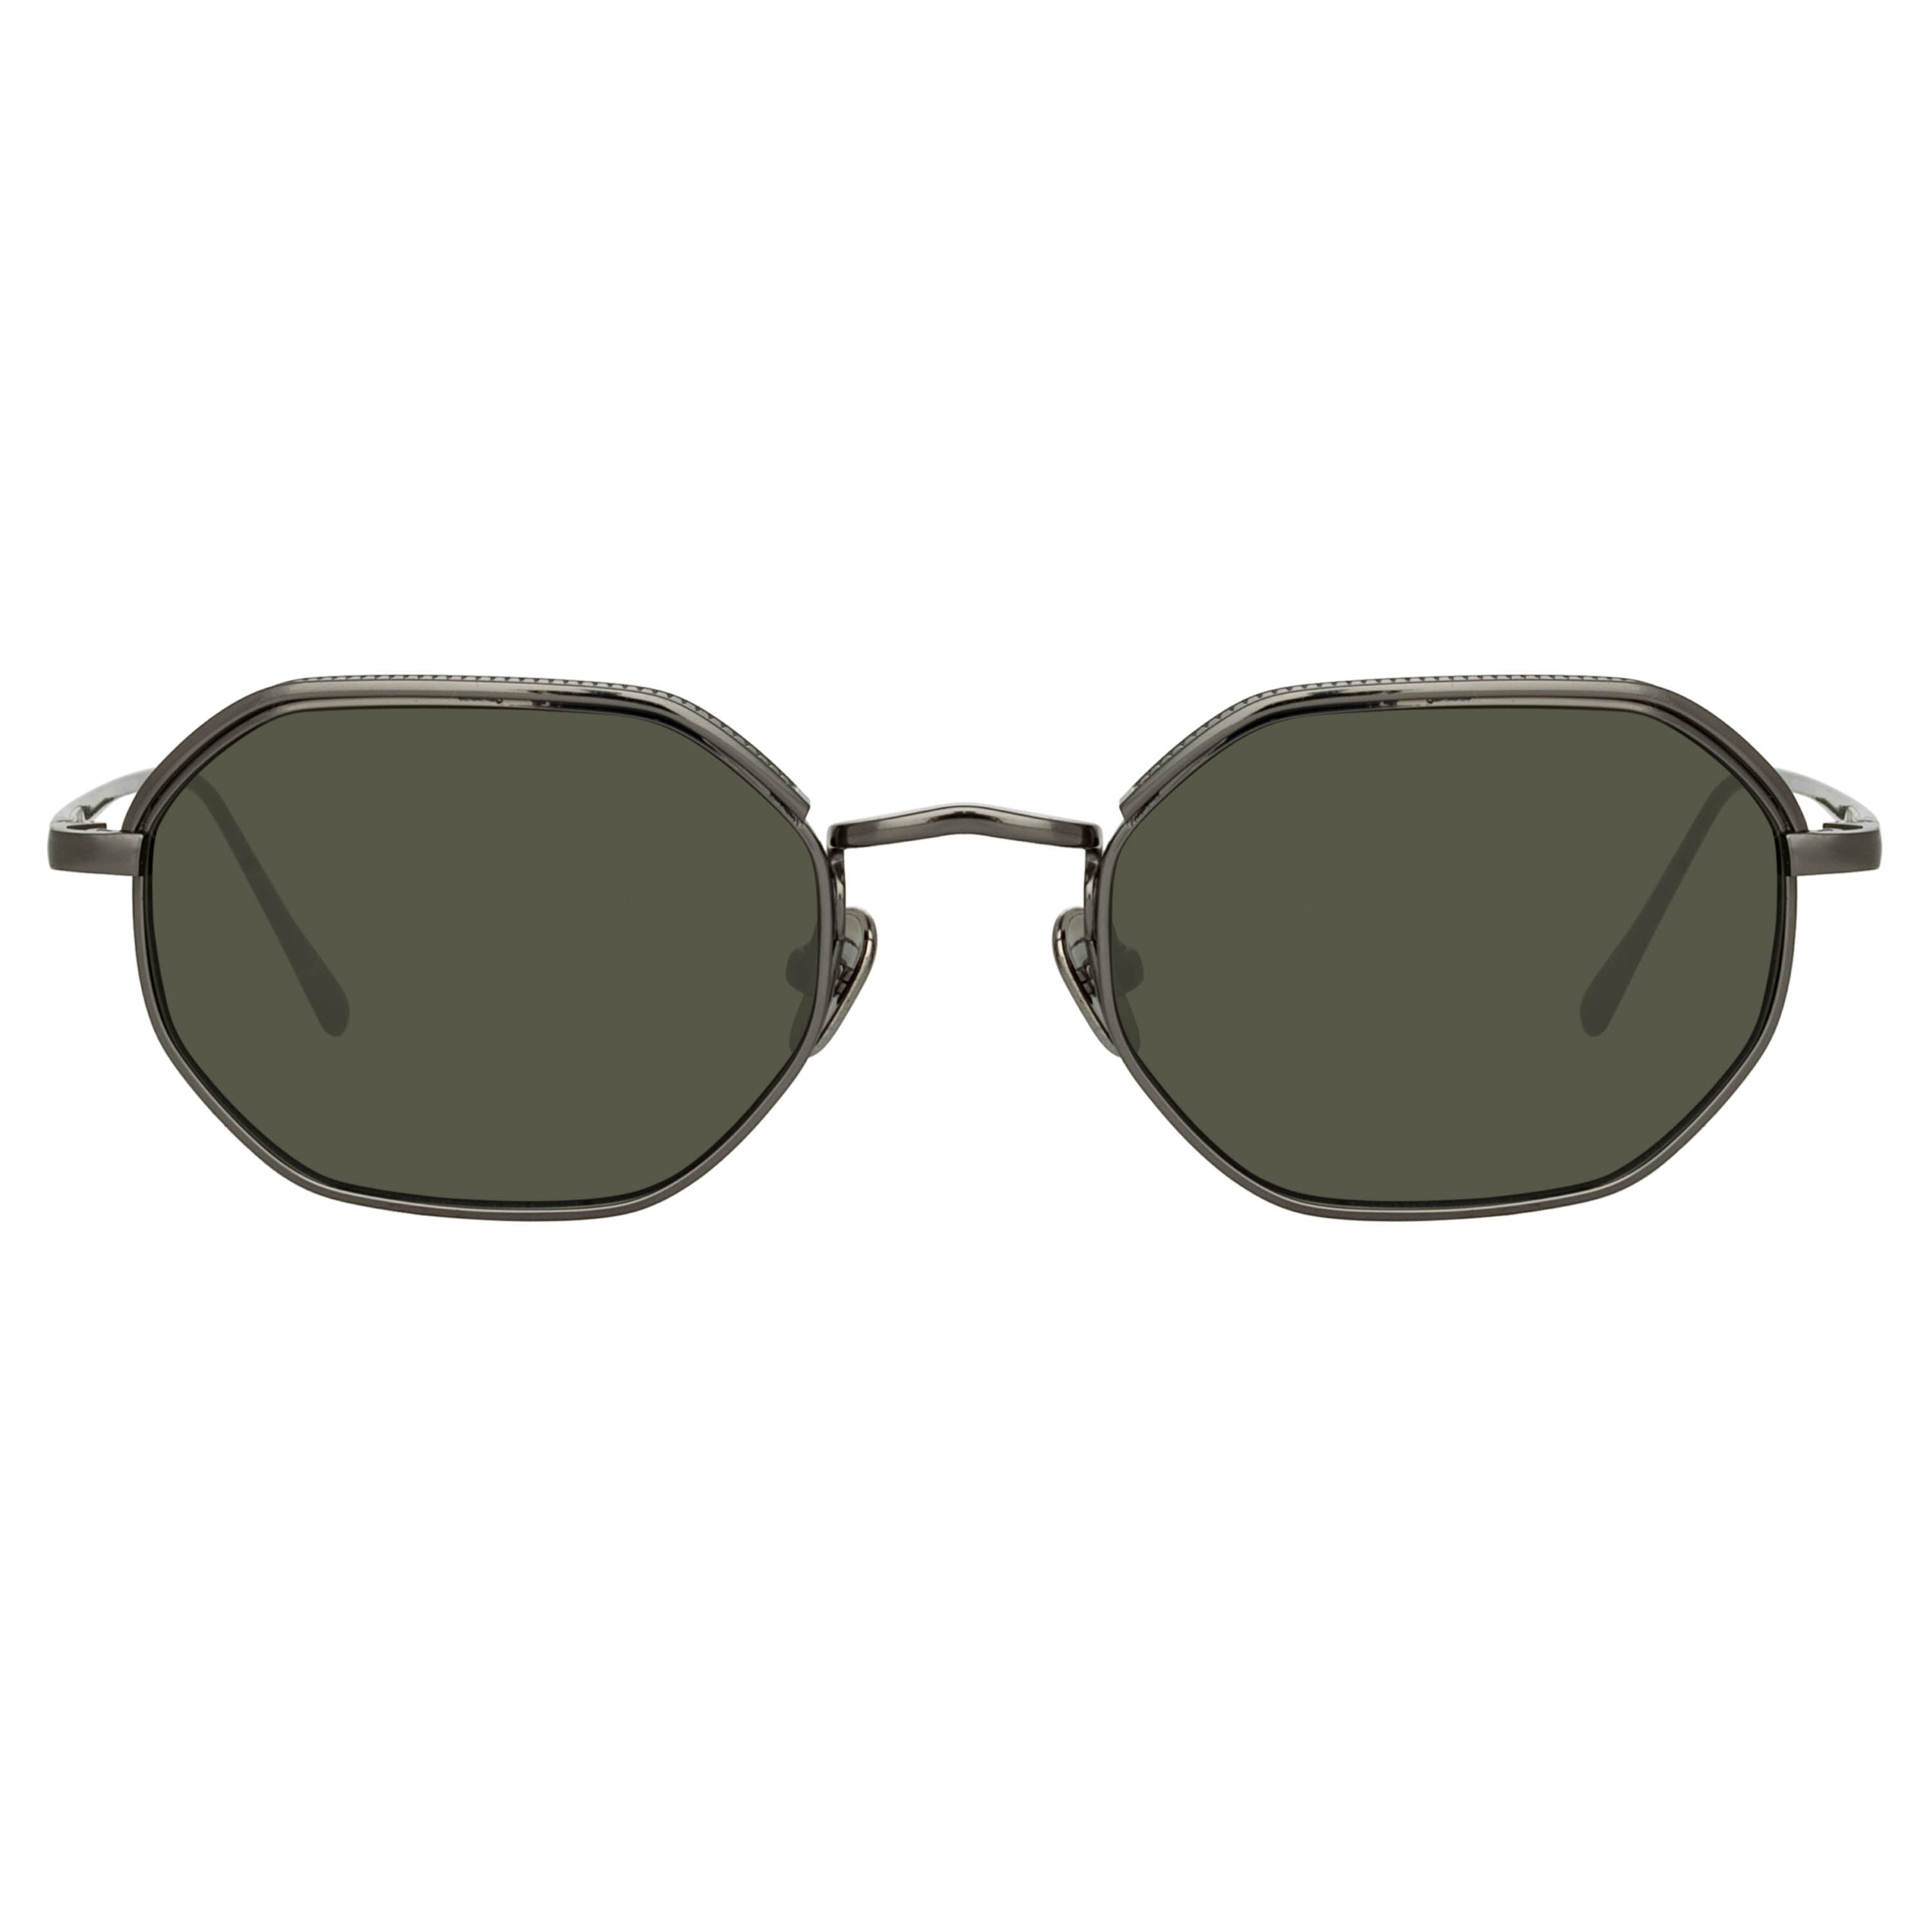 Shaw Angular Glasses in Nickel and Grey